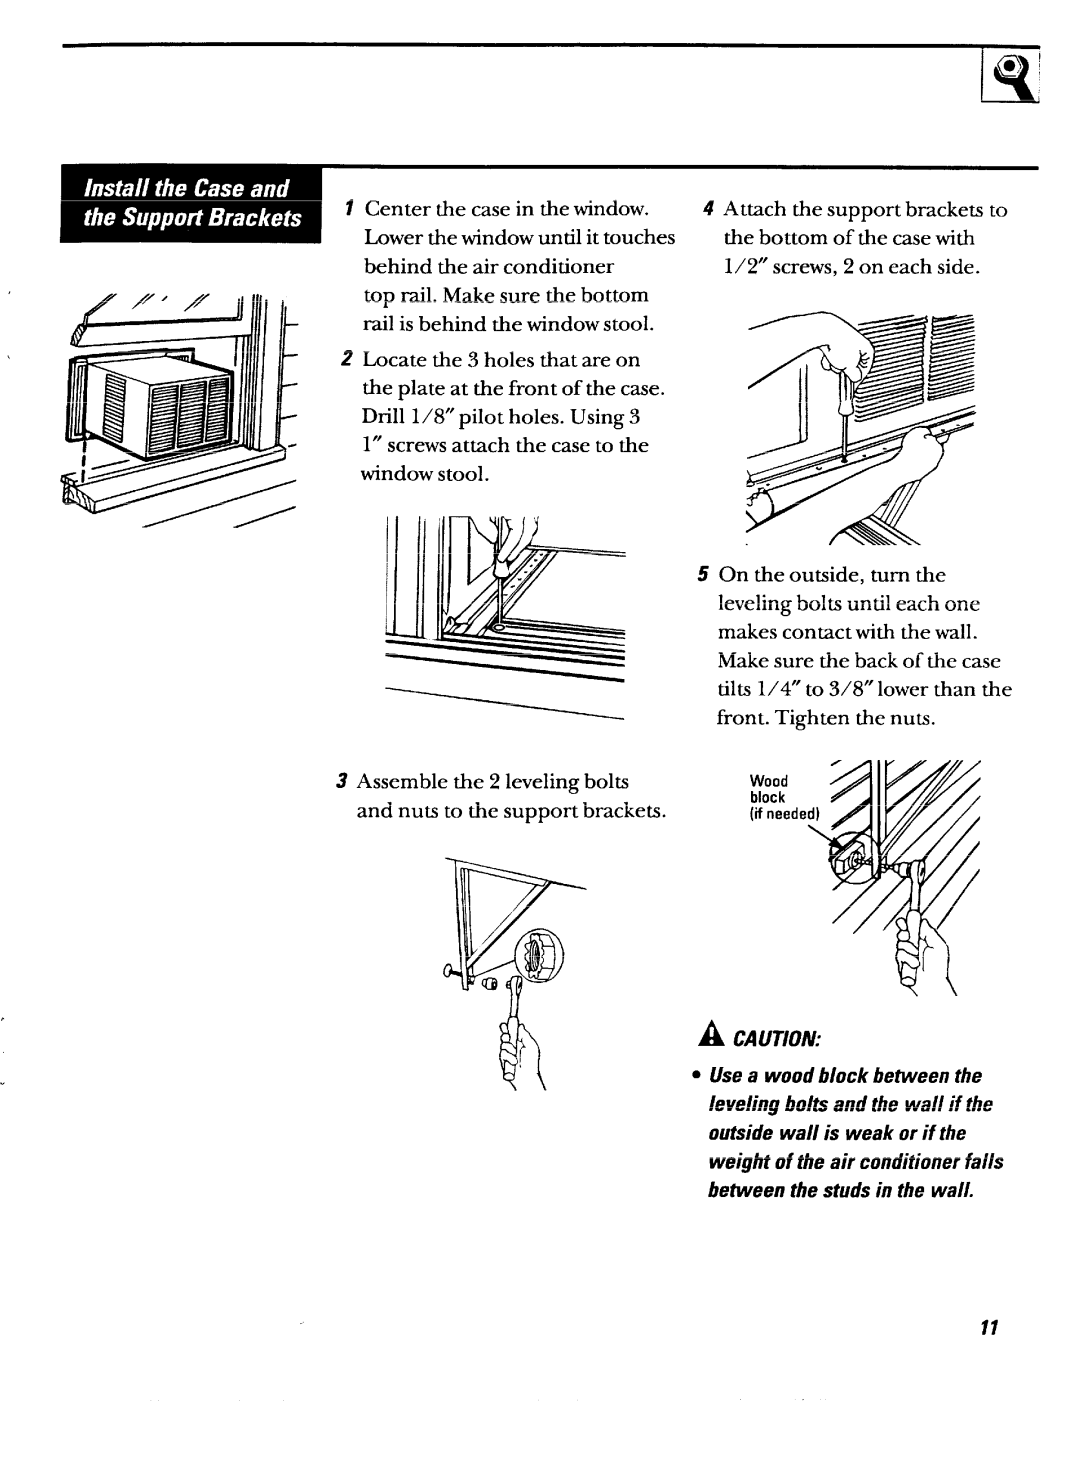 GE ABN12 operating instructions Acaution, window stool 